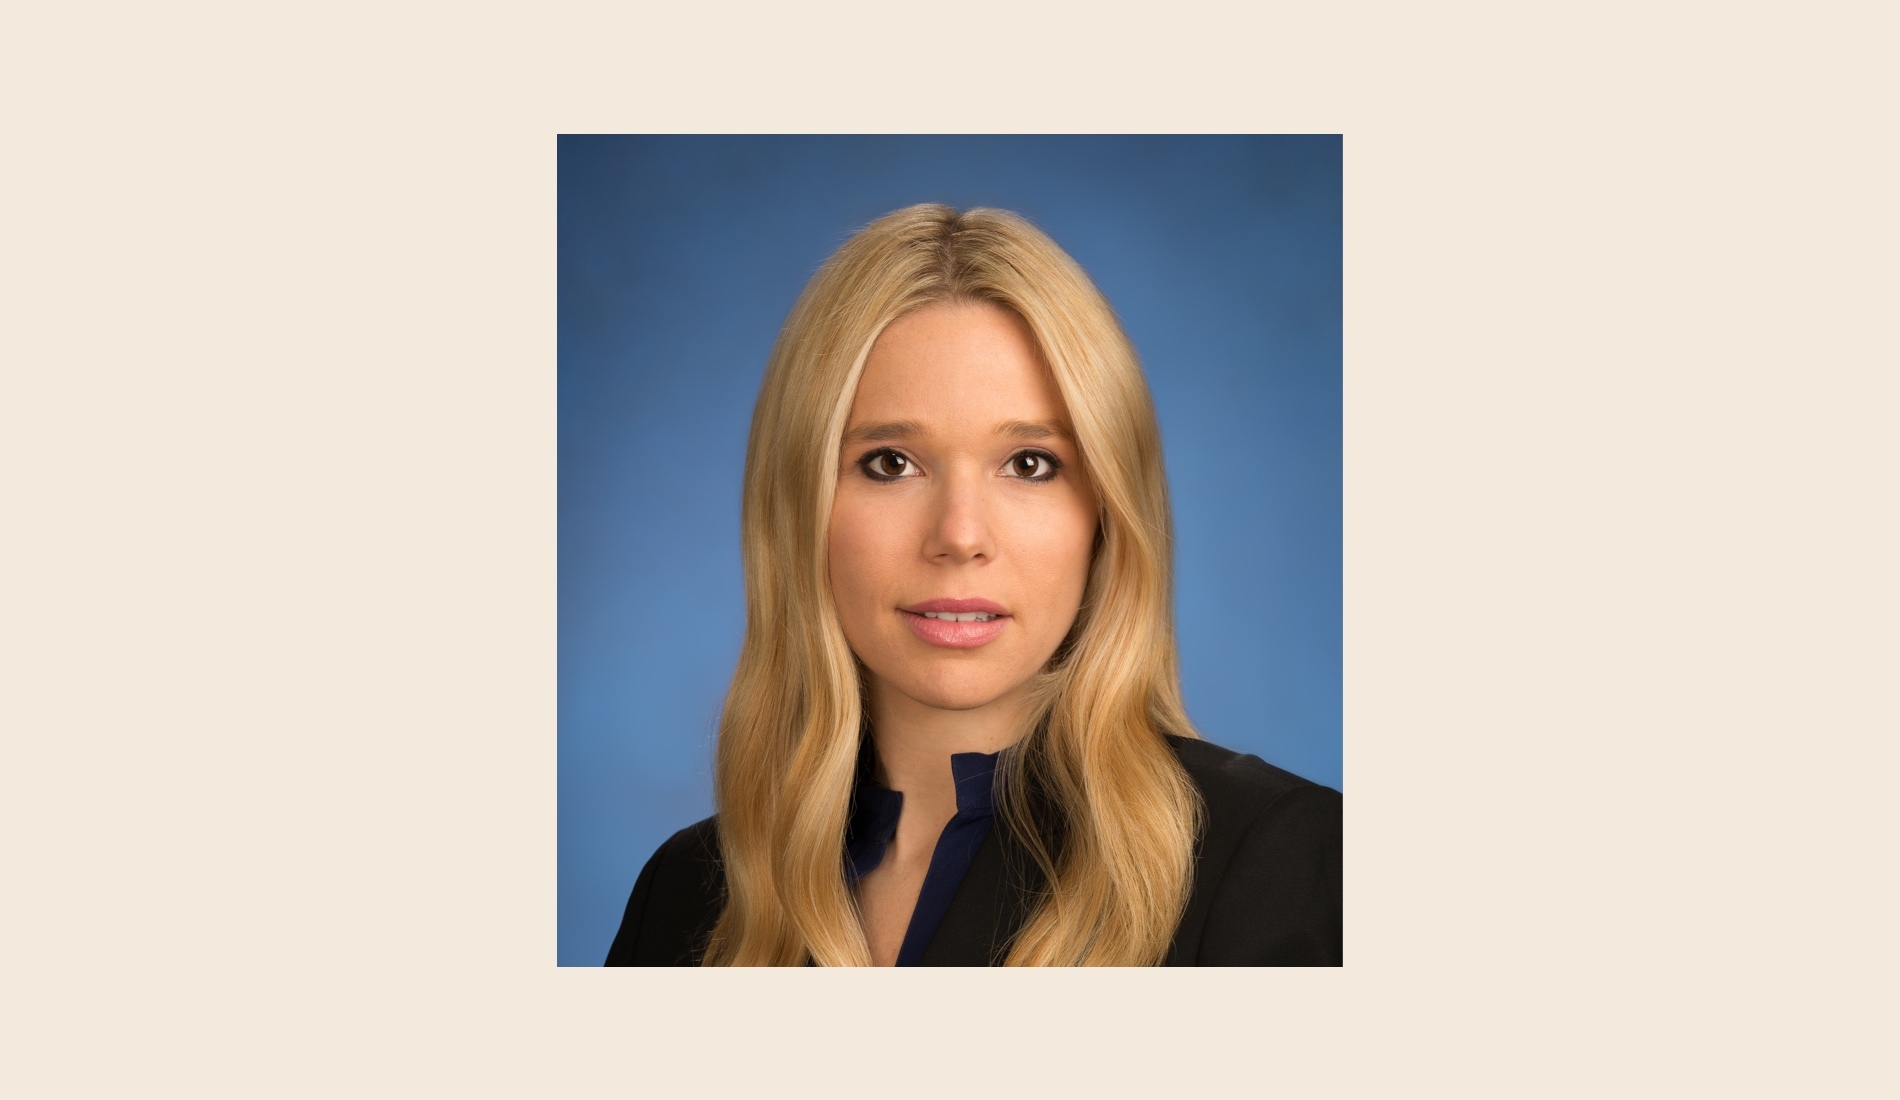 Sara Naison-Tarajano, Partner and Global Head of Private Wealth Management Capital Markets at Goldman Sachs, Joins the Innocence Project Board of Directors